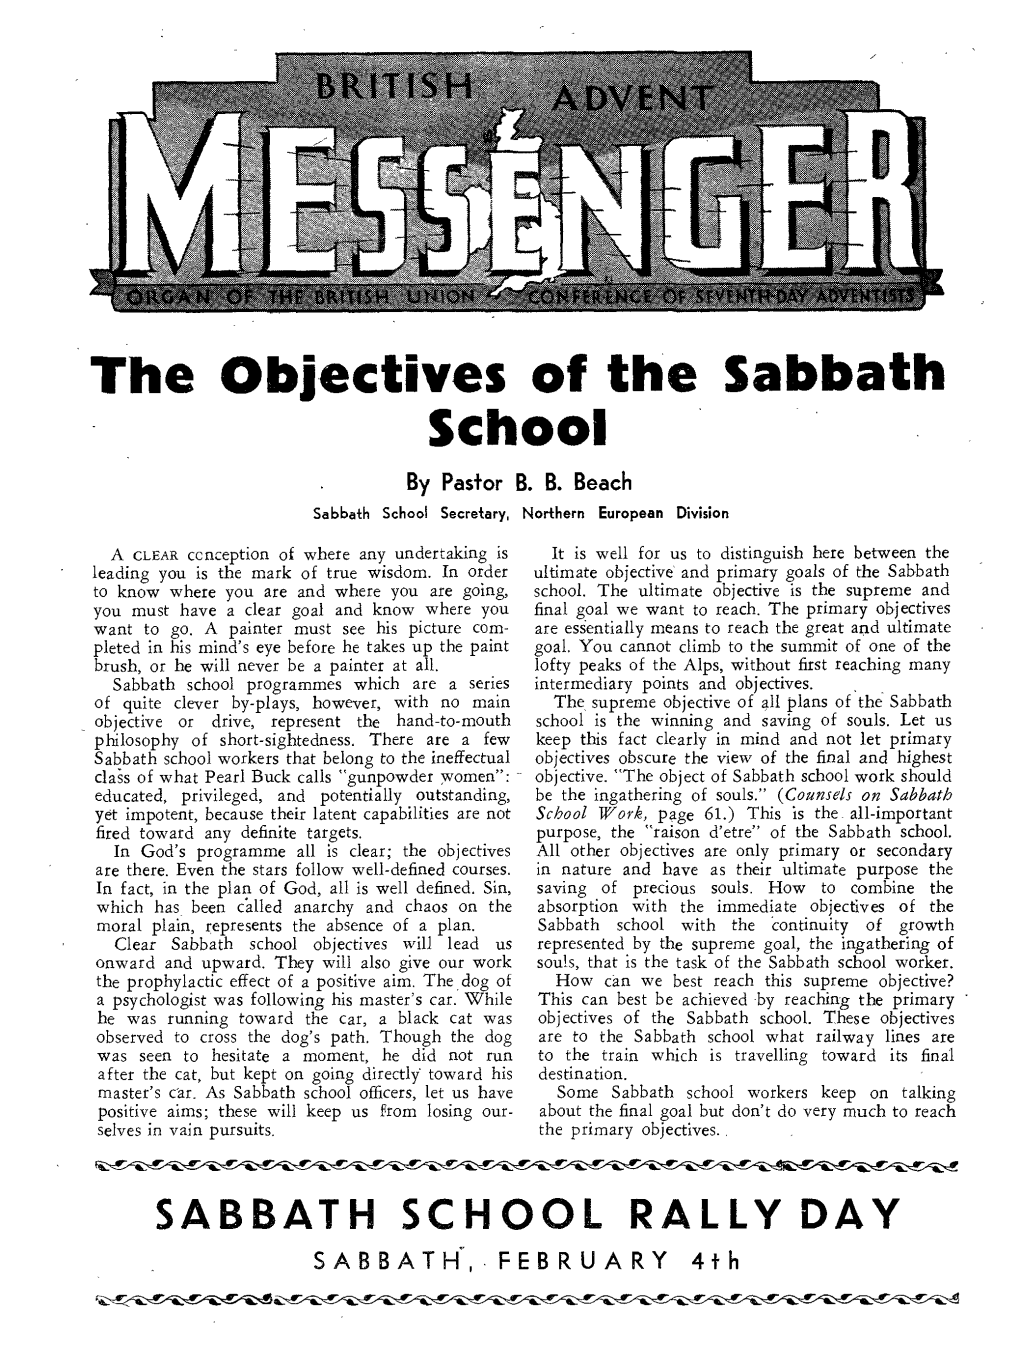 The Objectives of the Sabbath School by Pastor B